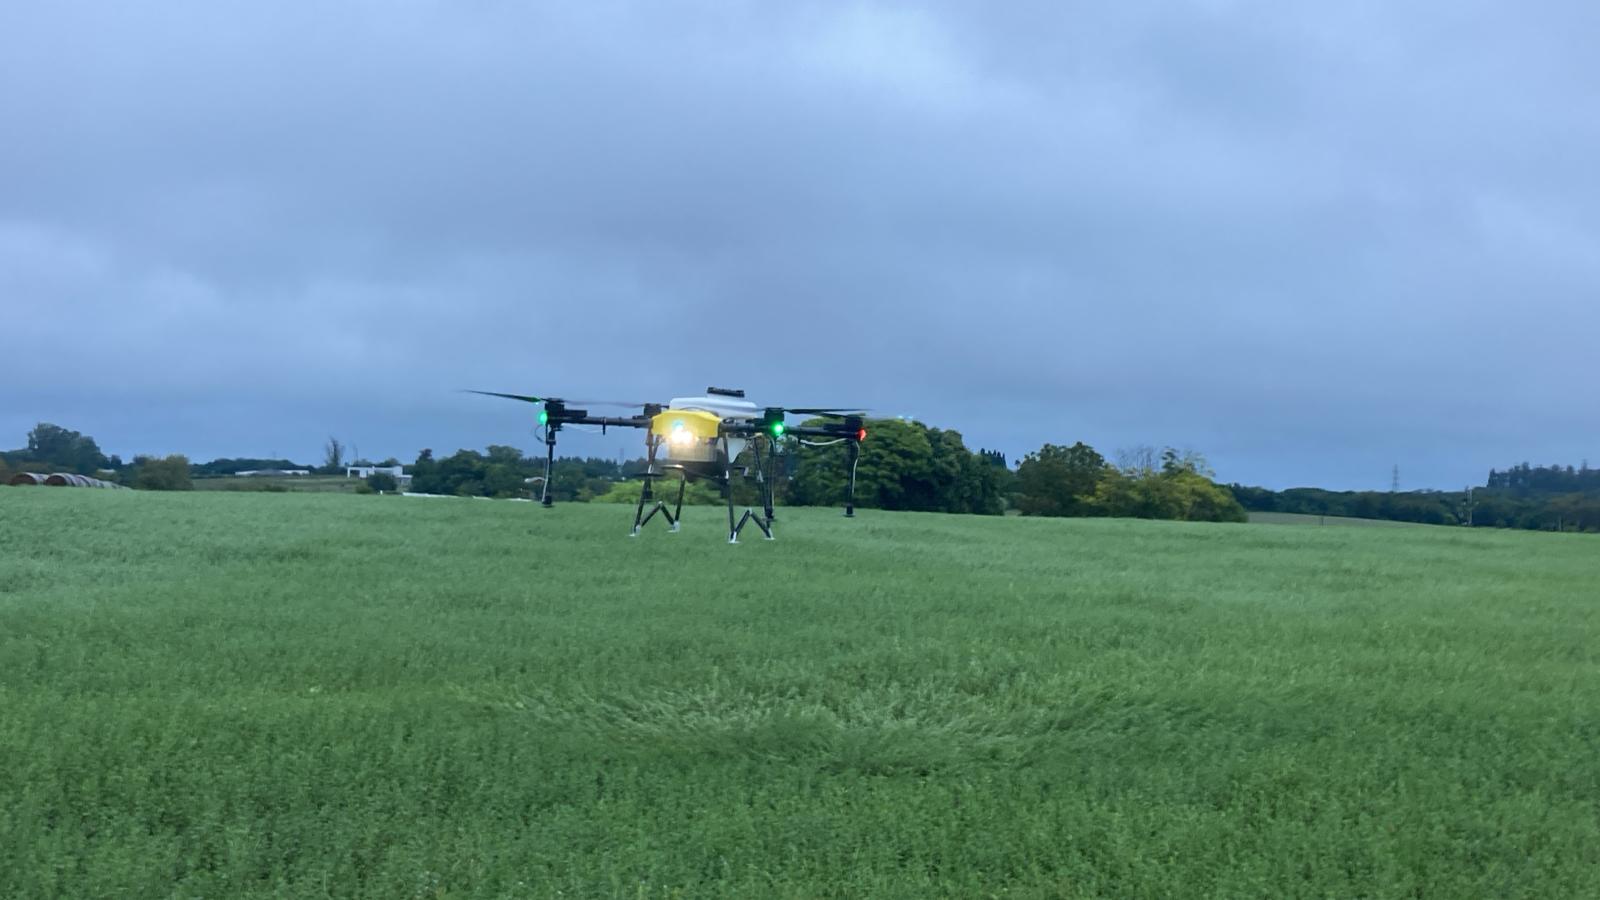 What’s Driving Growth in the Crop Spraying Drone Market?